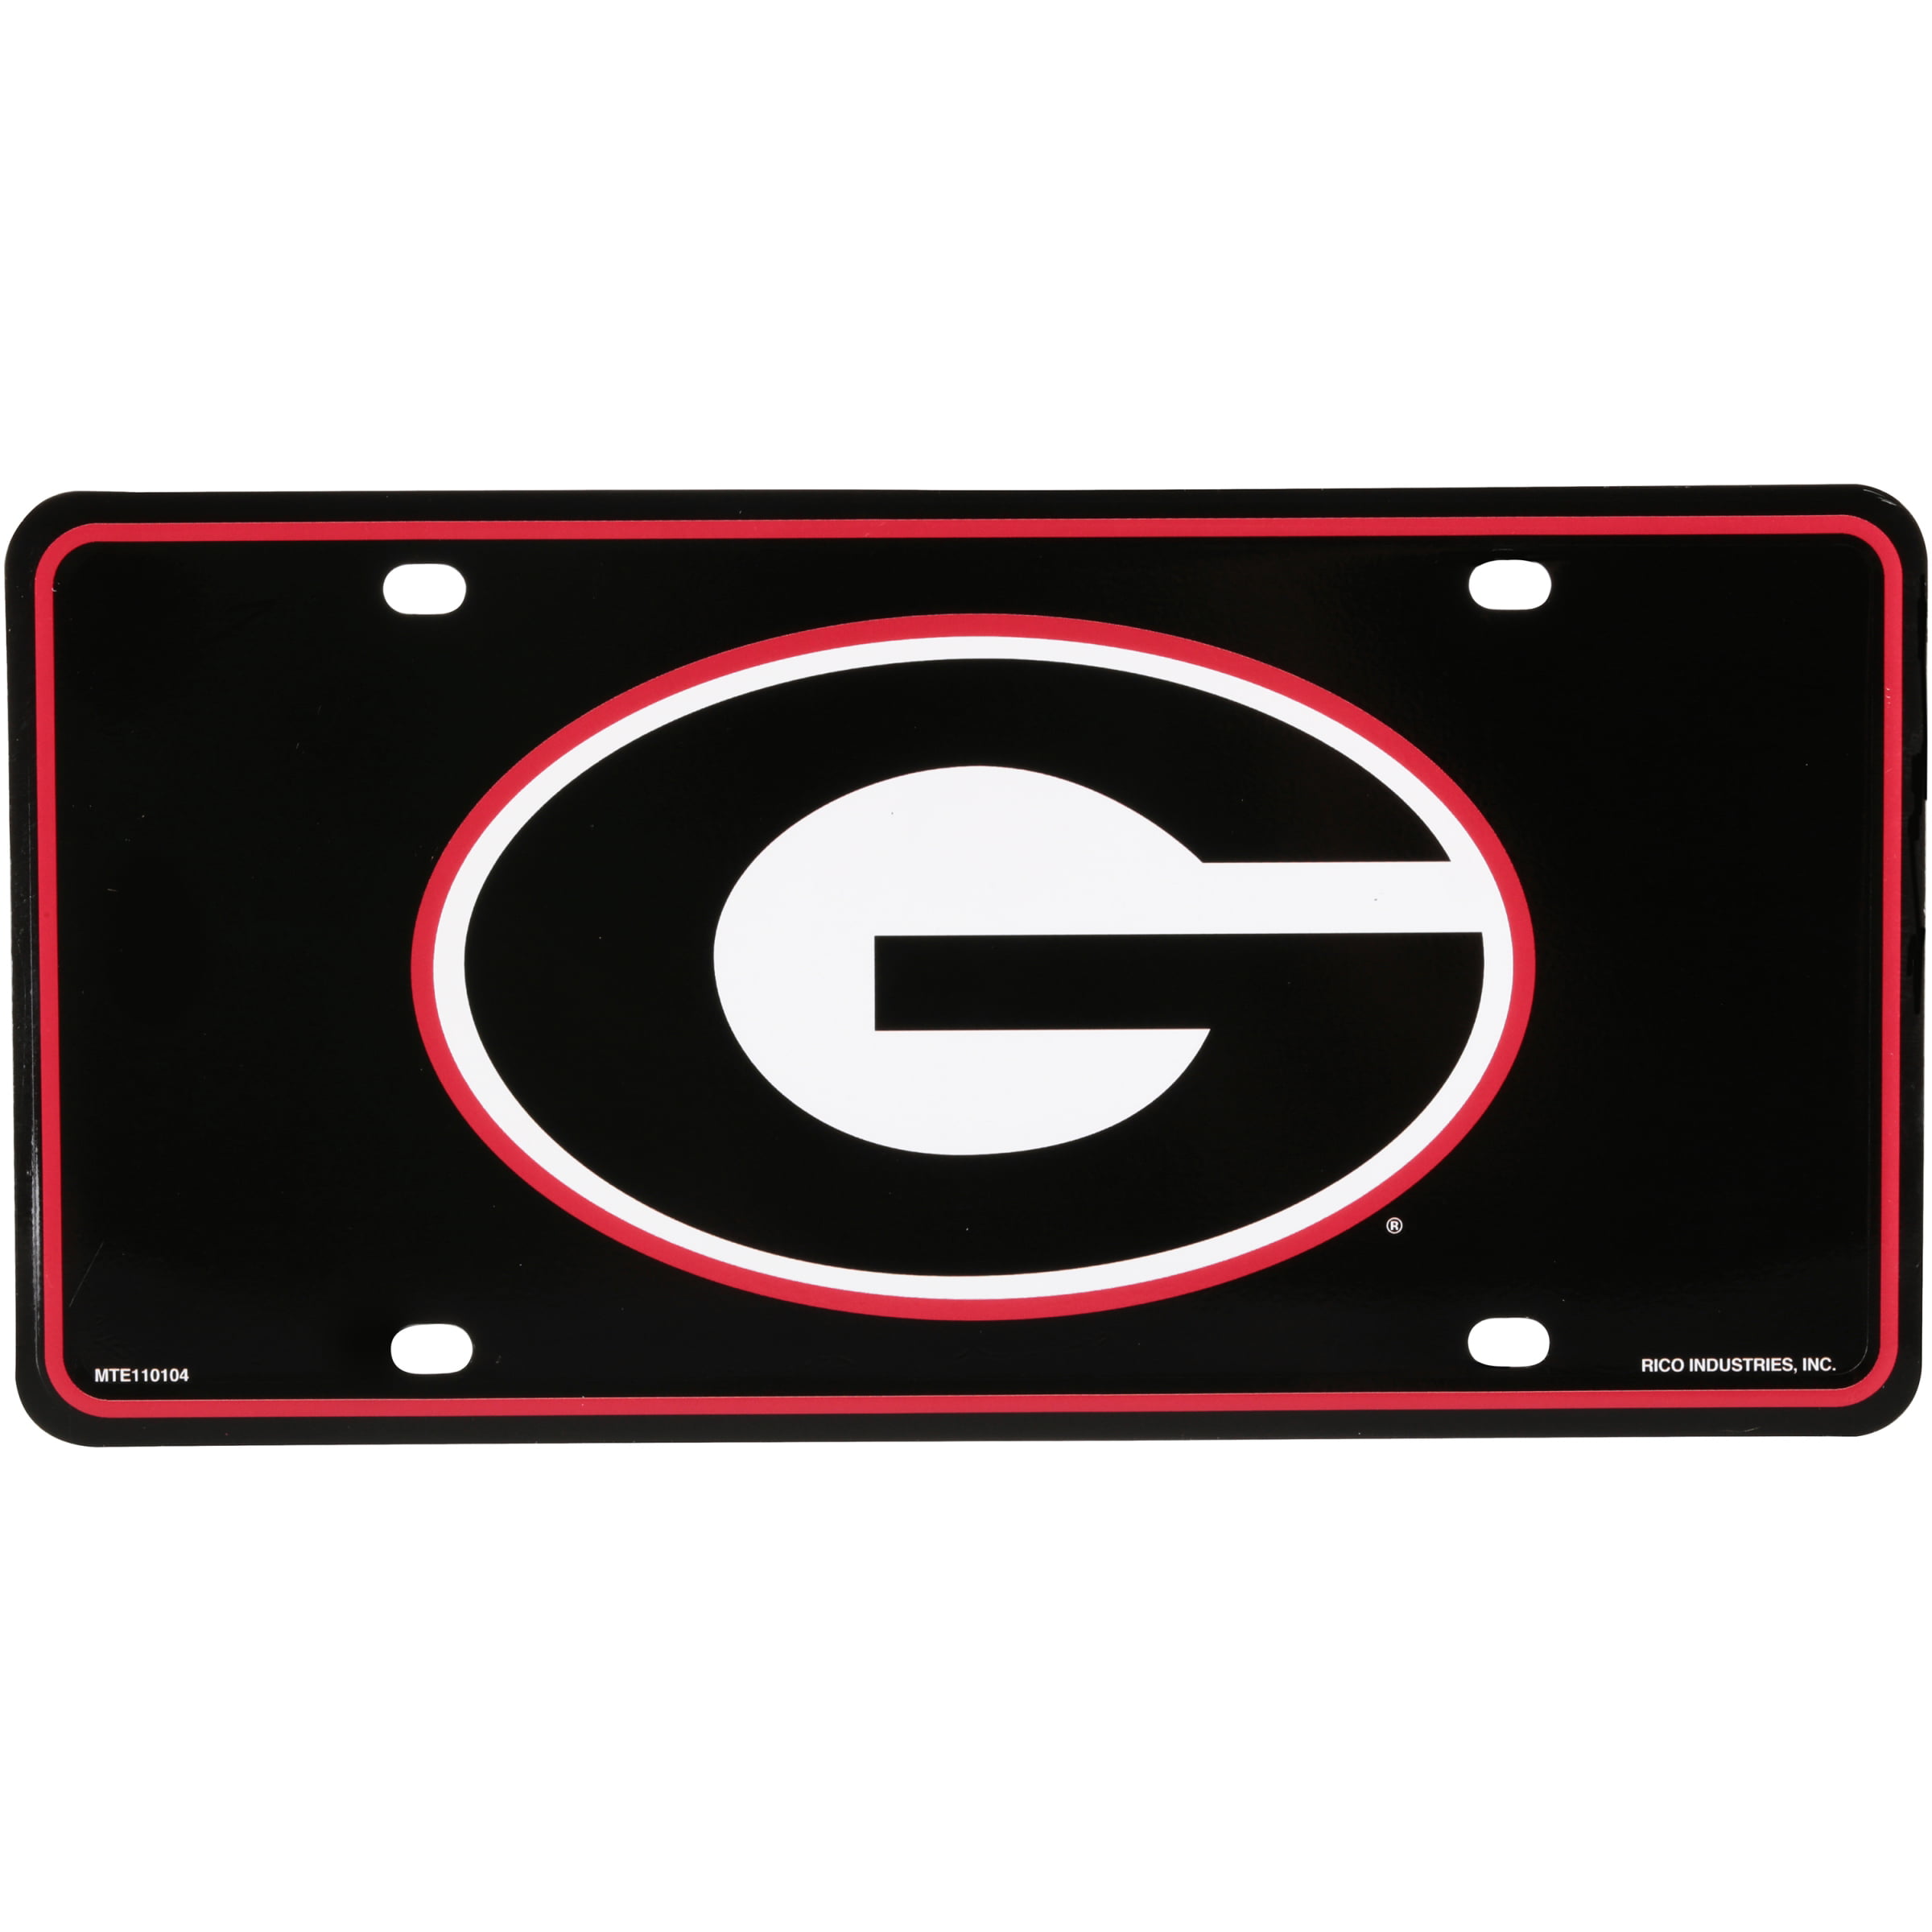 Georgia Girl G irl License Plate Sign Metal Tag Truck Car Auto FAST SHIPPING 